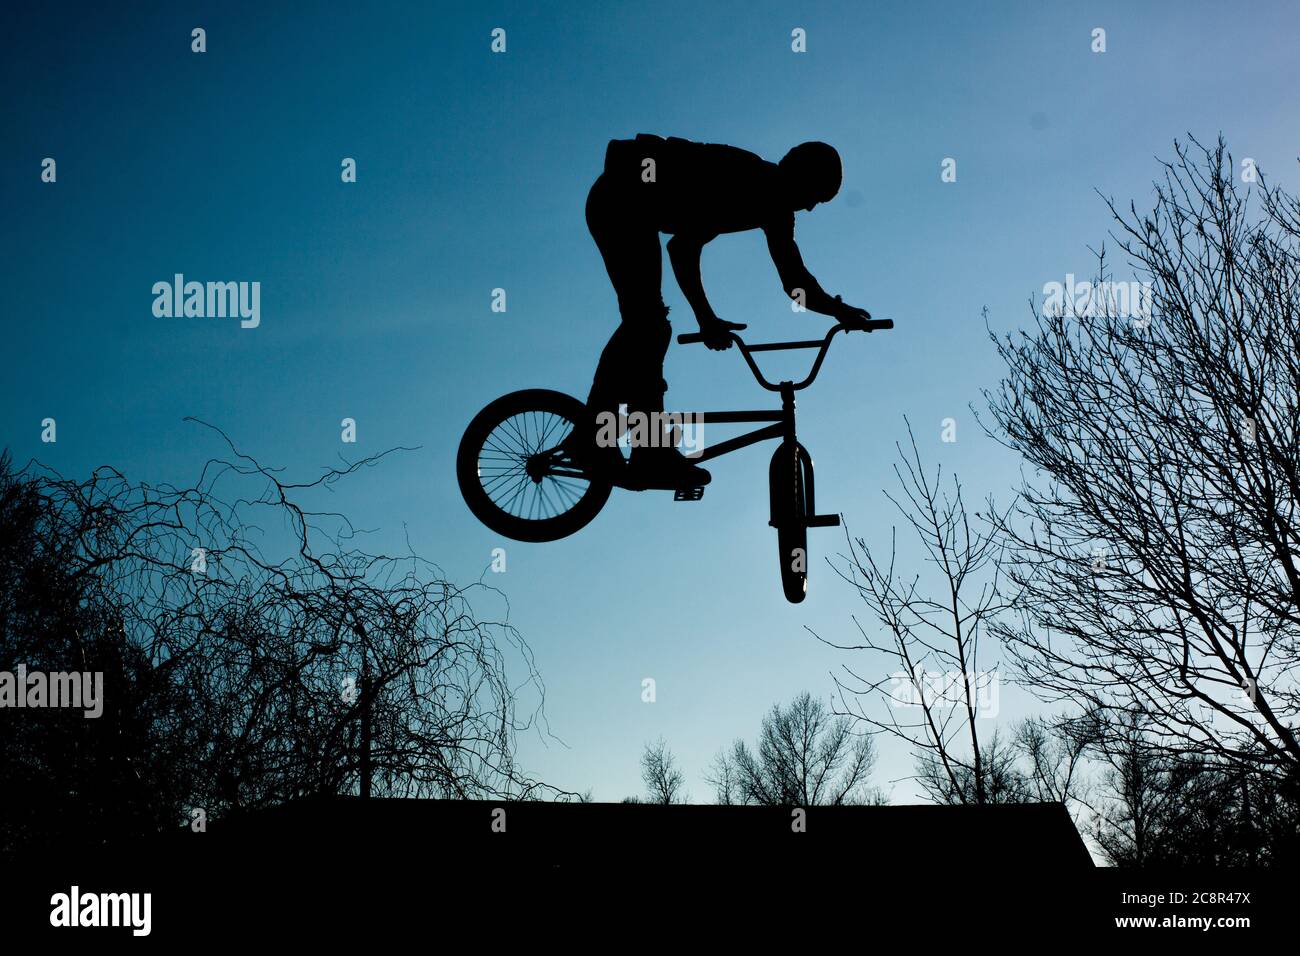 Urban athlete biker performing acrobatic jump. Guy riding bmx bicycle at extreme sport competition. Alternative lifestyle concept. Stock Photo